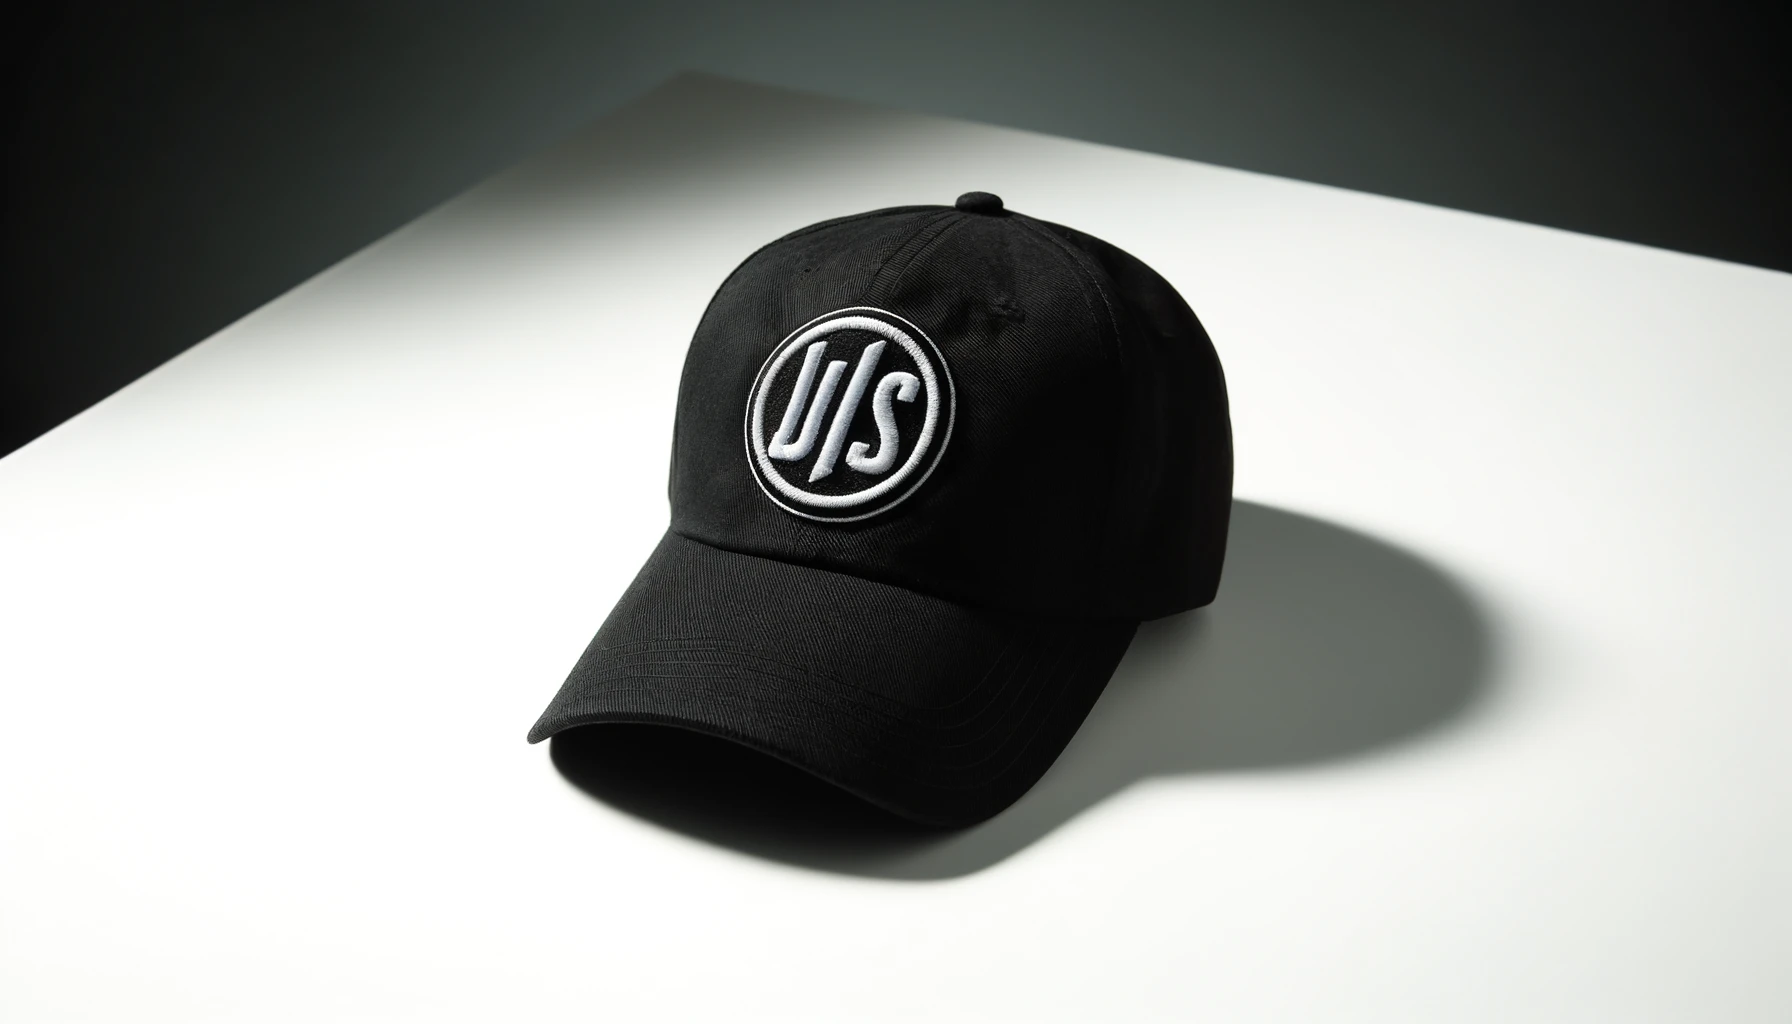 A freshly washed and clean black cap with a large logo in a color other than black, placed on a clean white surface, showing its pristine condition.